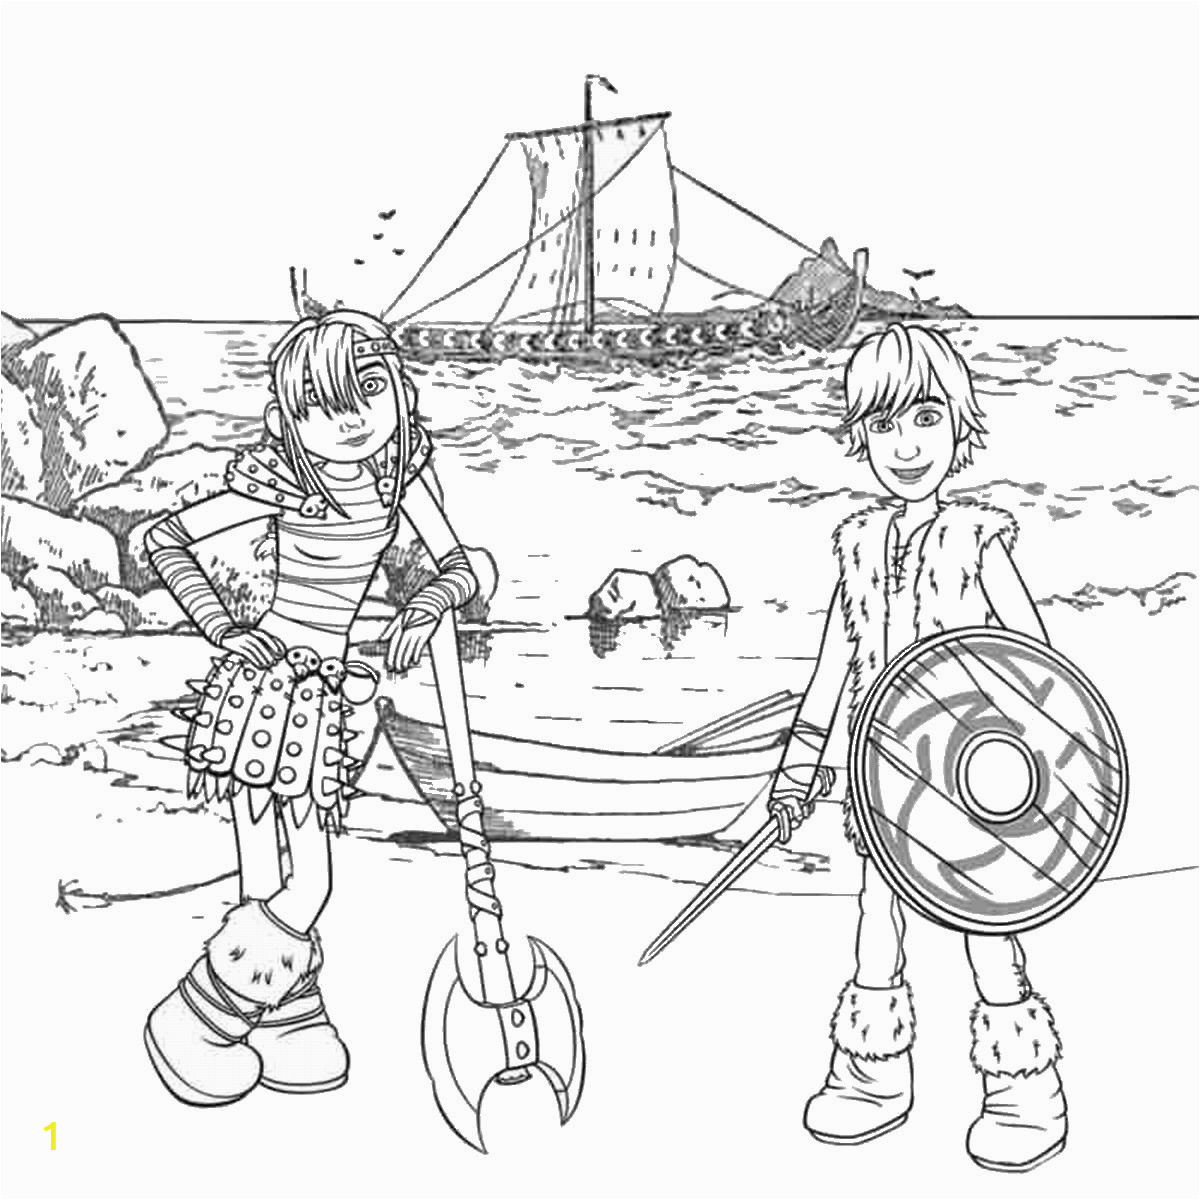 How to Train Your Dragon Coloring Pages Online Train Your Dragon Coloring Pages Coloring Home